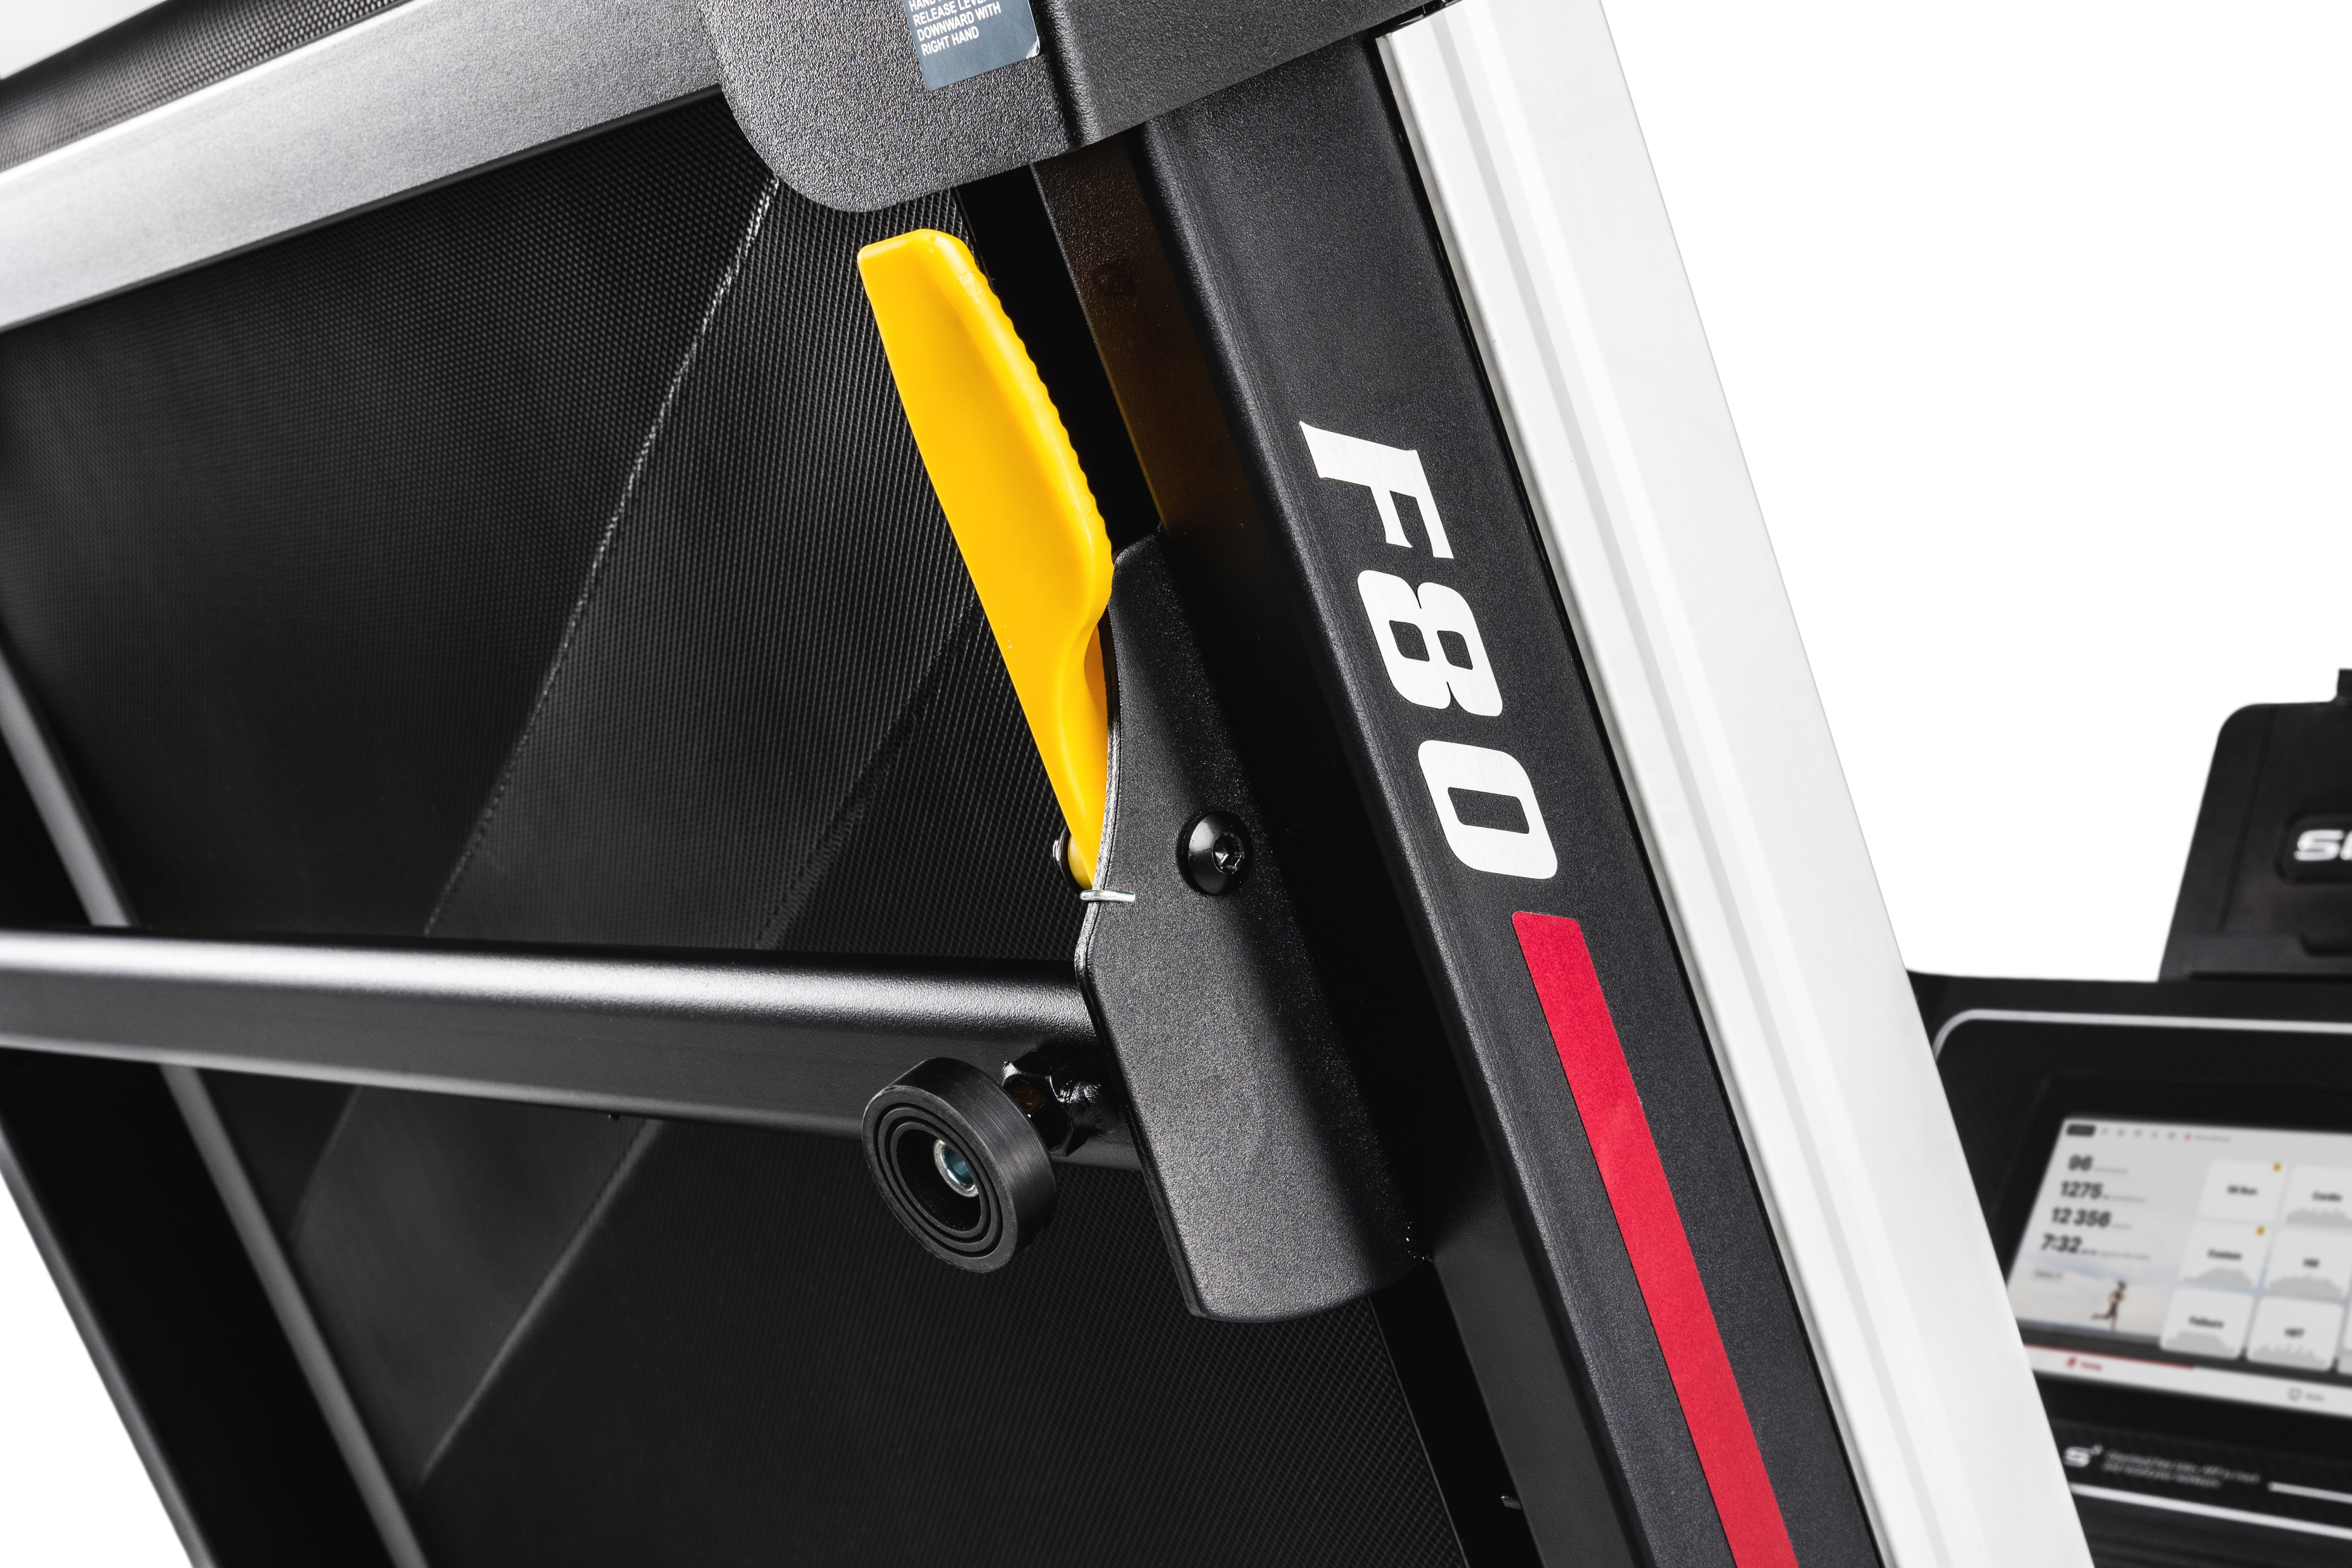 Close-up view of the Sole F80 treadmill's side, showcasing the textured black side panel with 'F80' branding, a yellow release handle, and a stabilizer at the base.